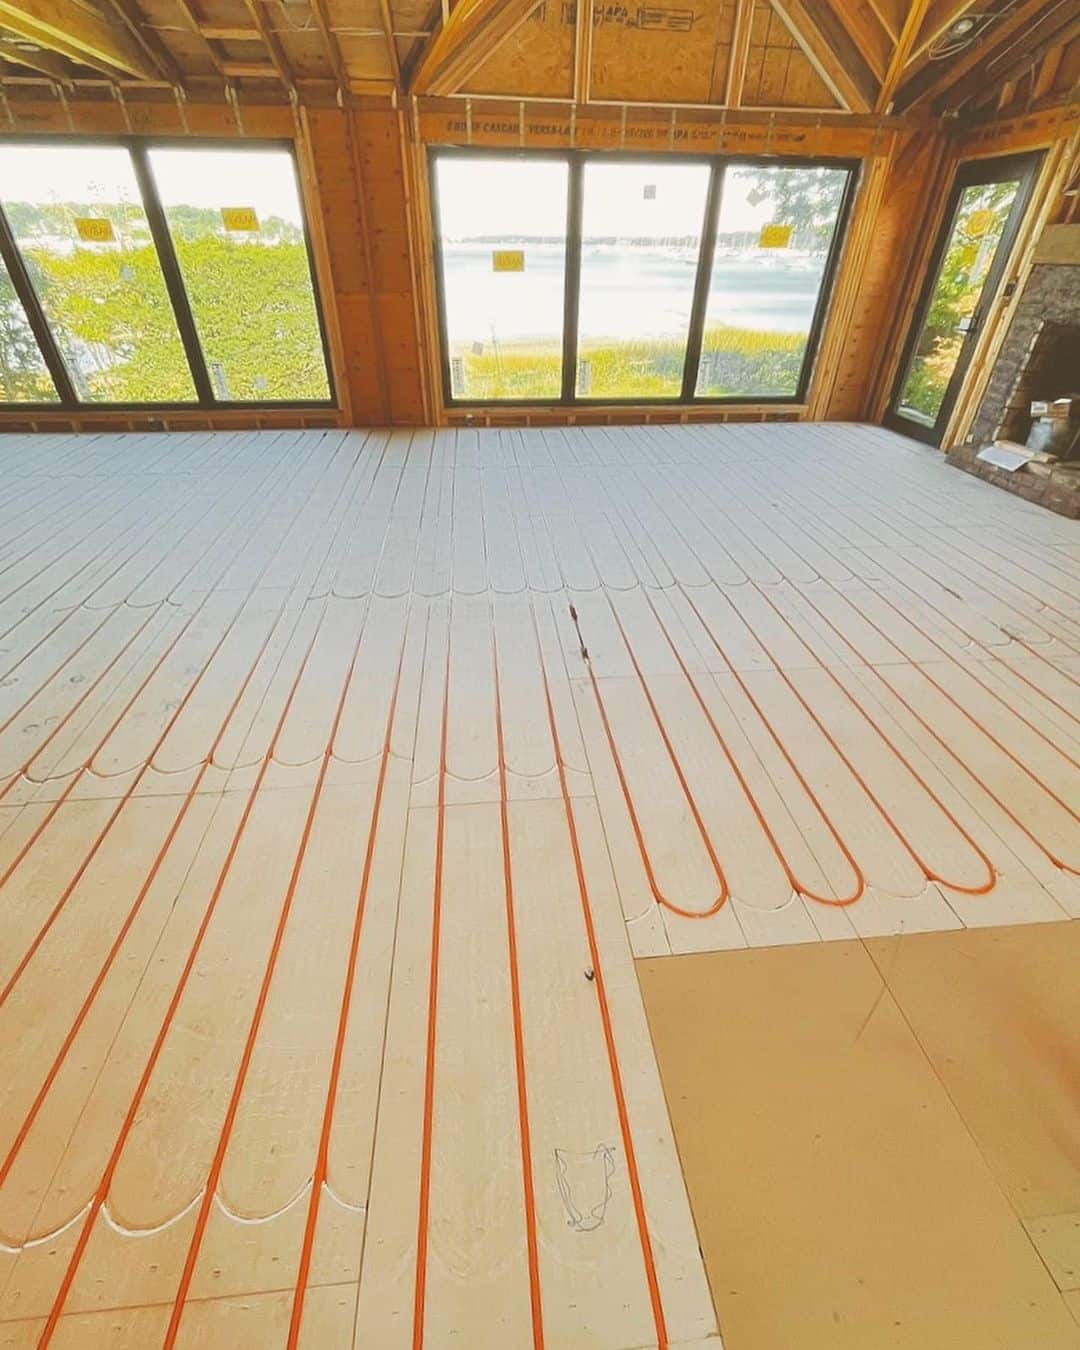 How Much Does a Radiant Floor Heating Cost